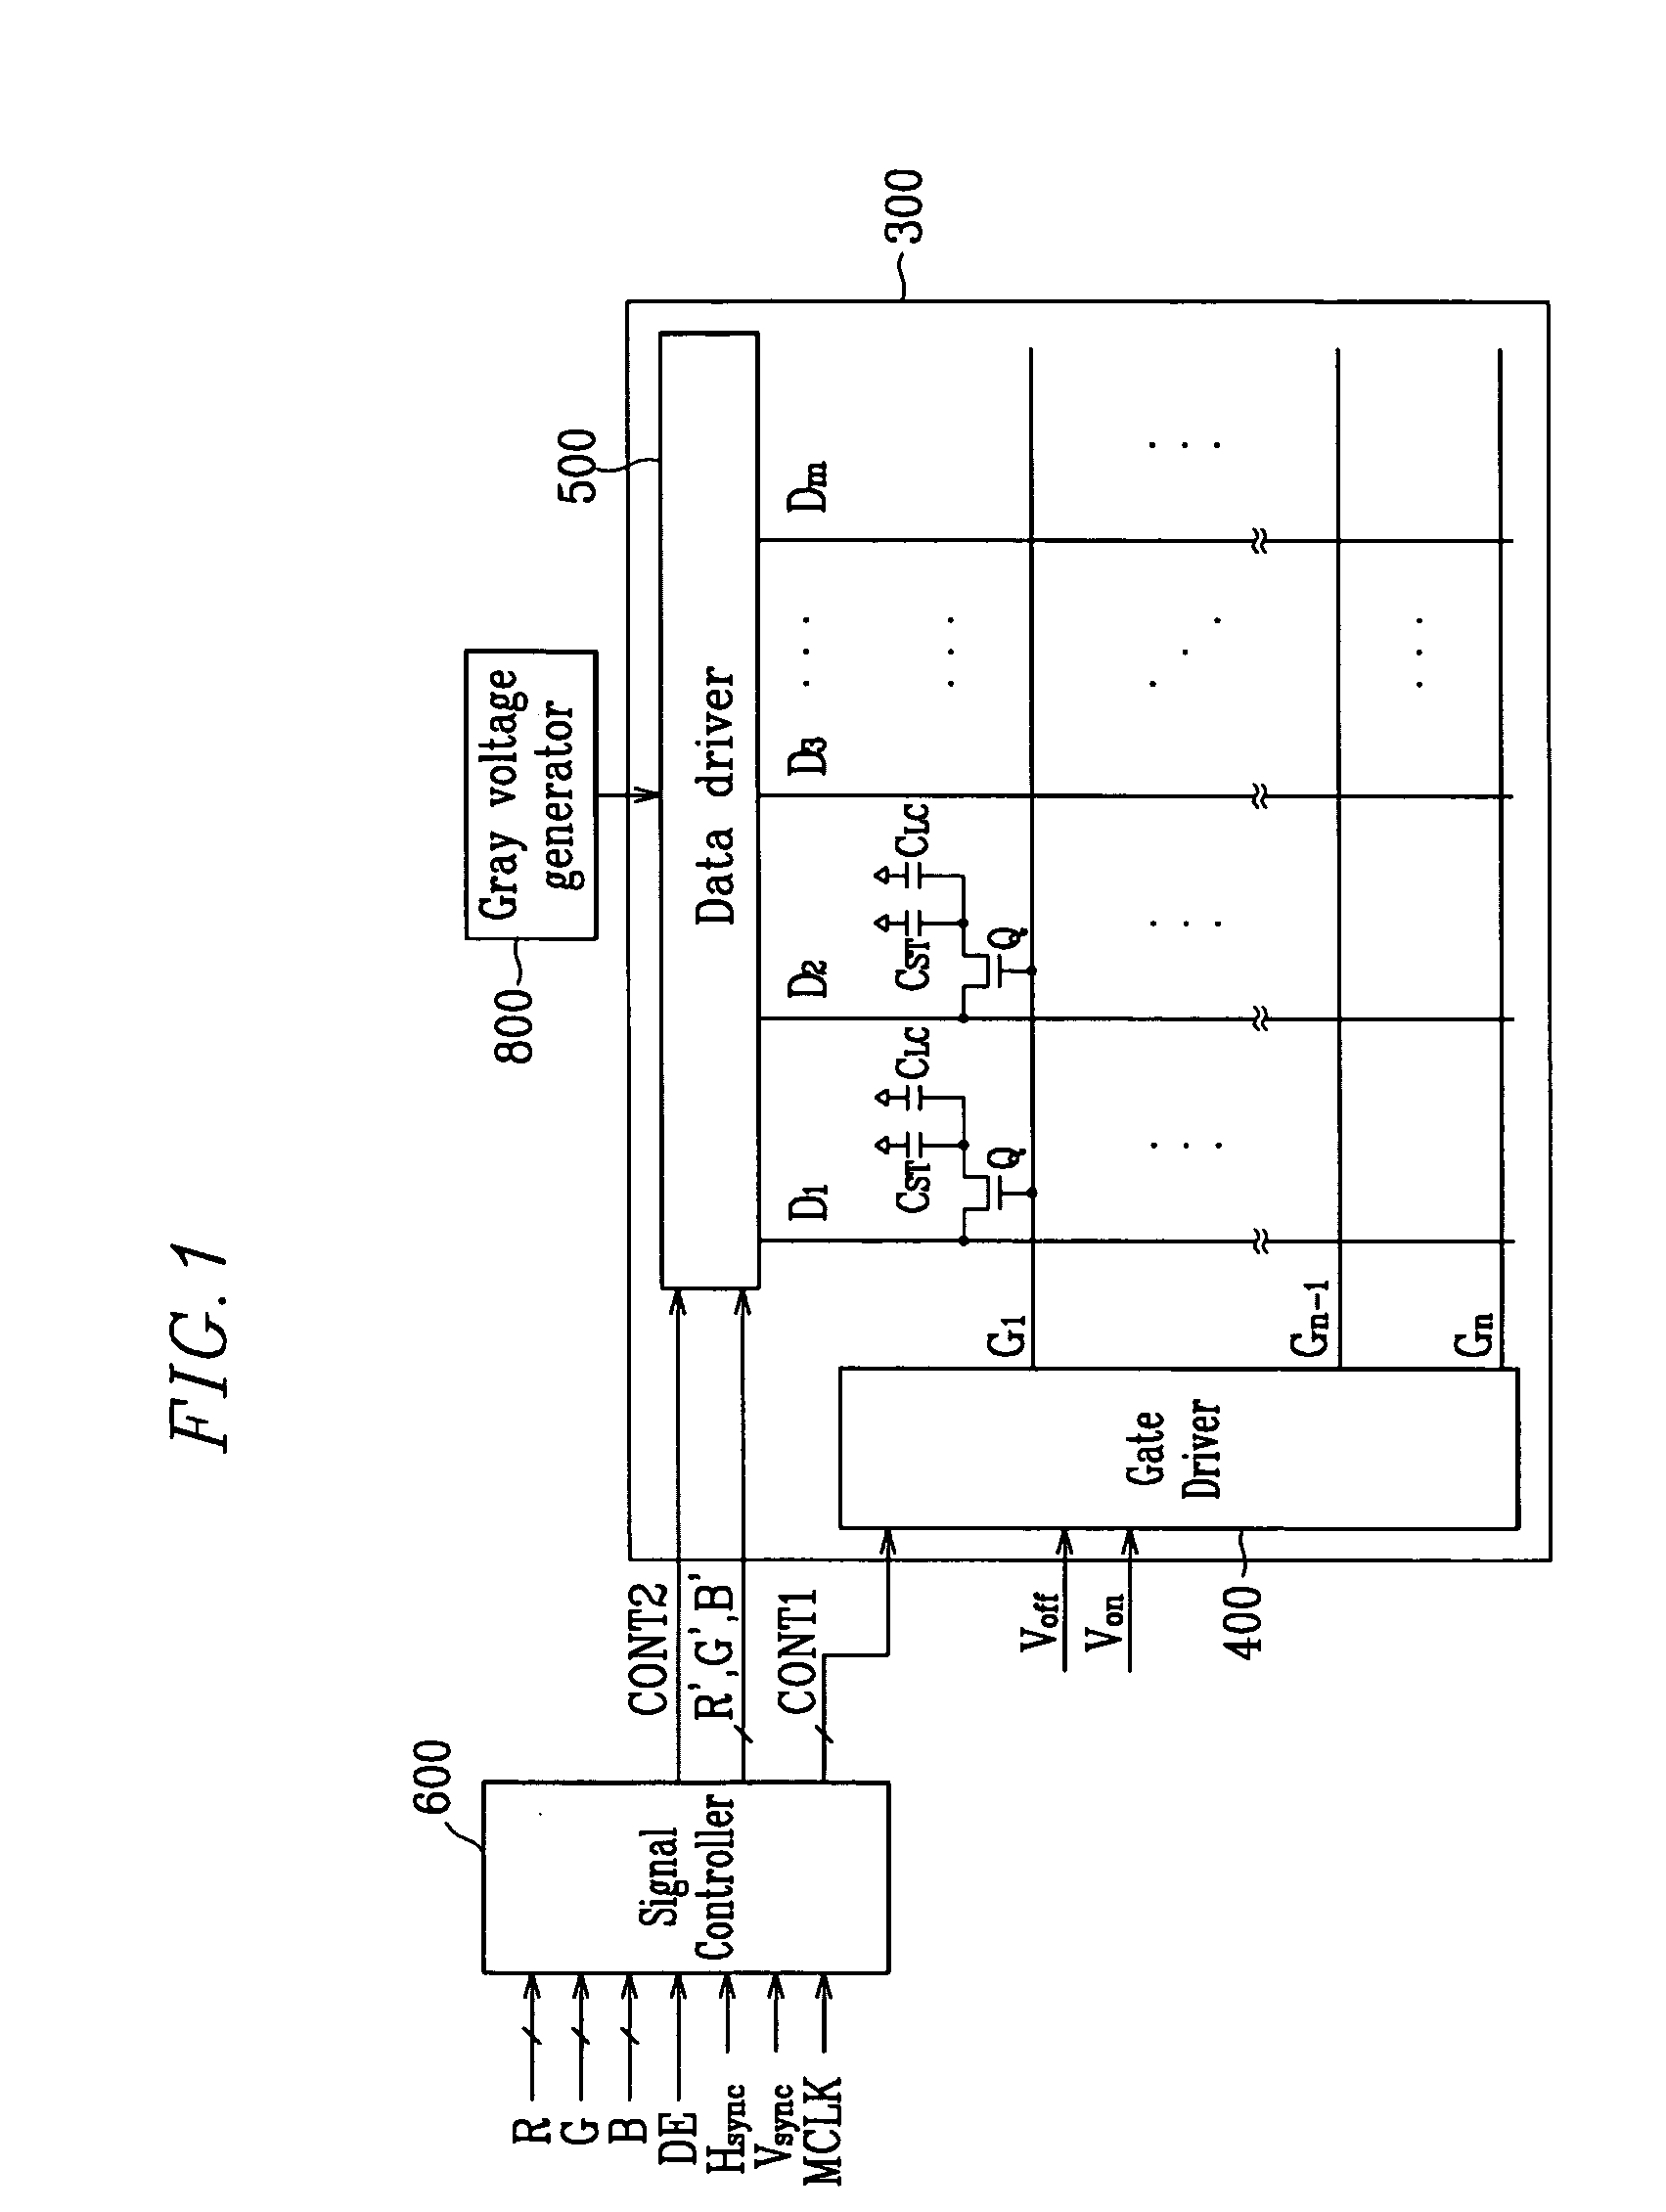 Display device and panel therefor